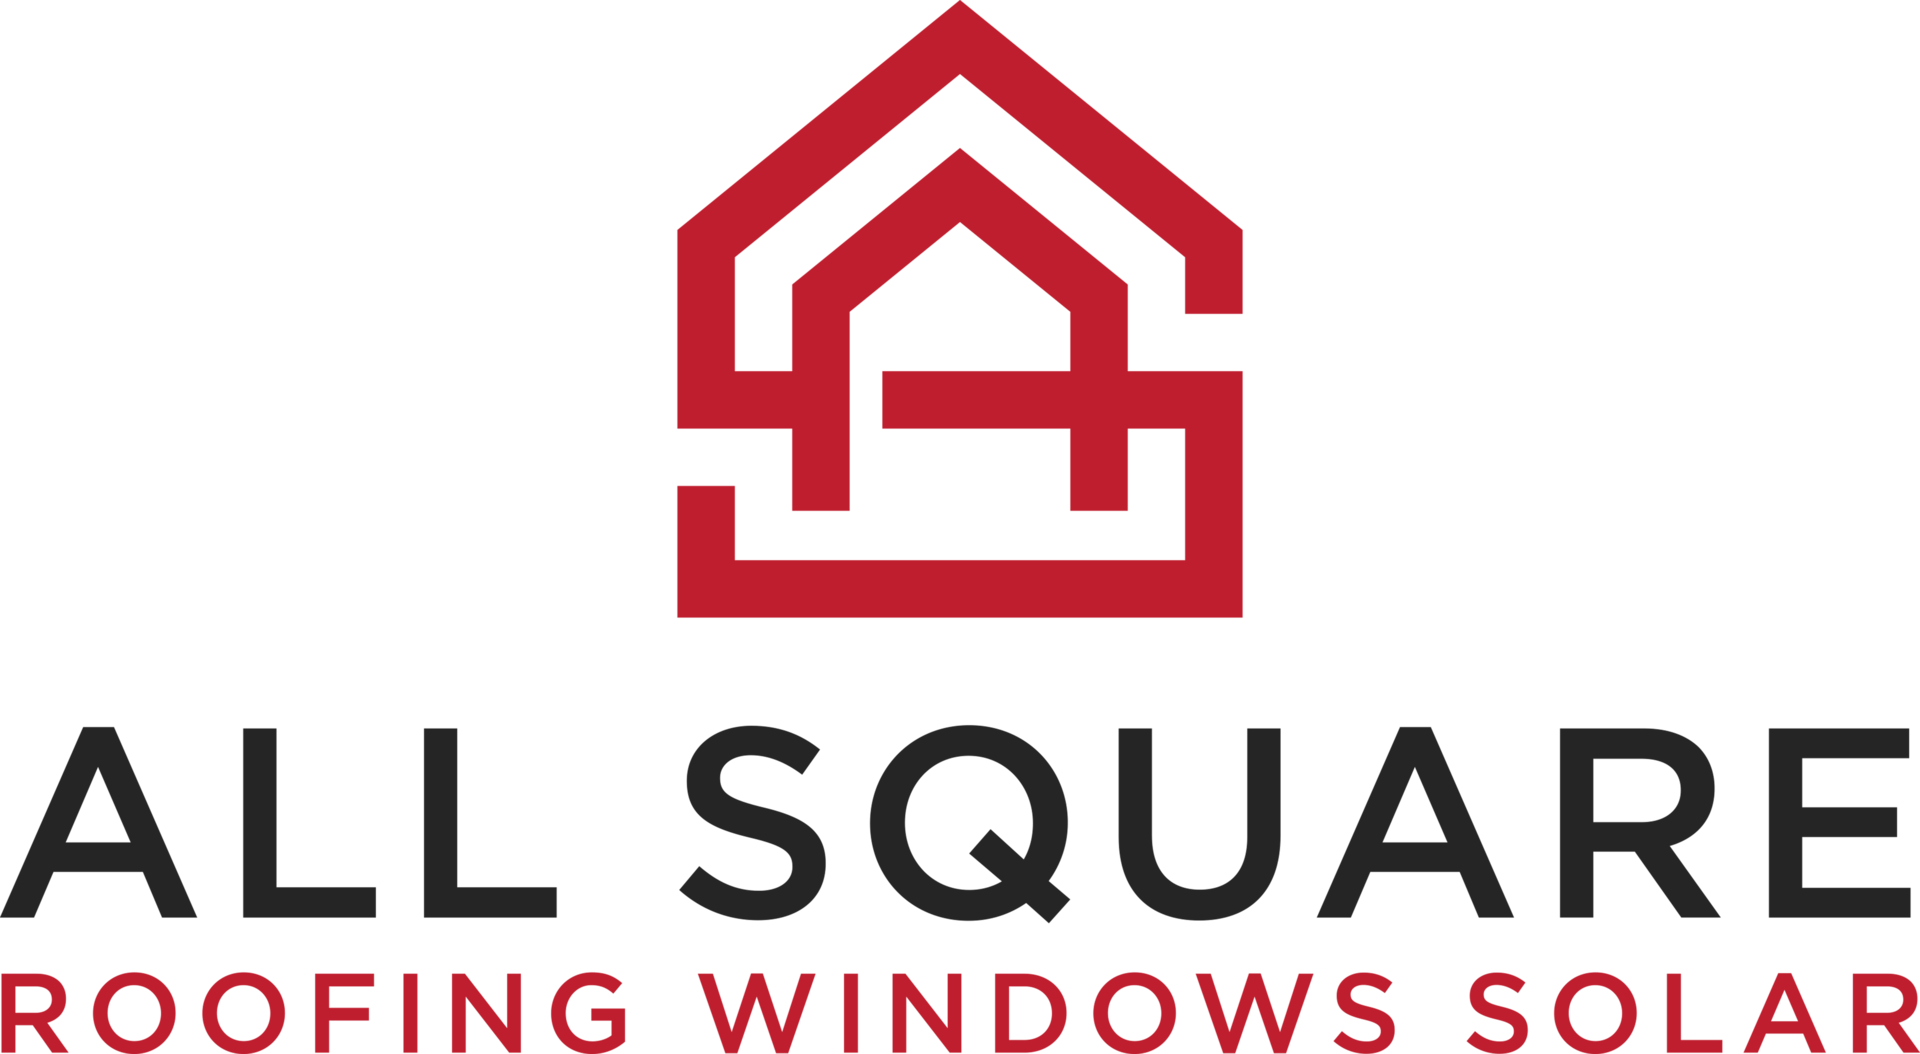 All Square Roofing